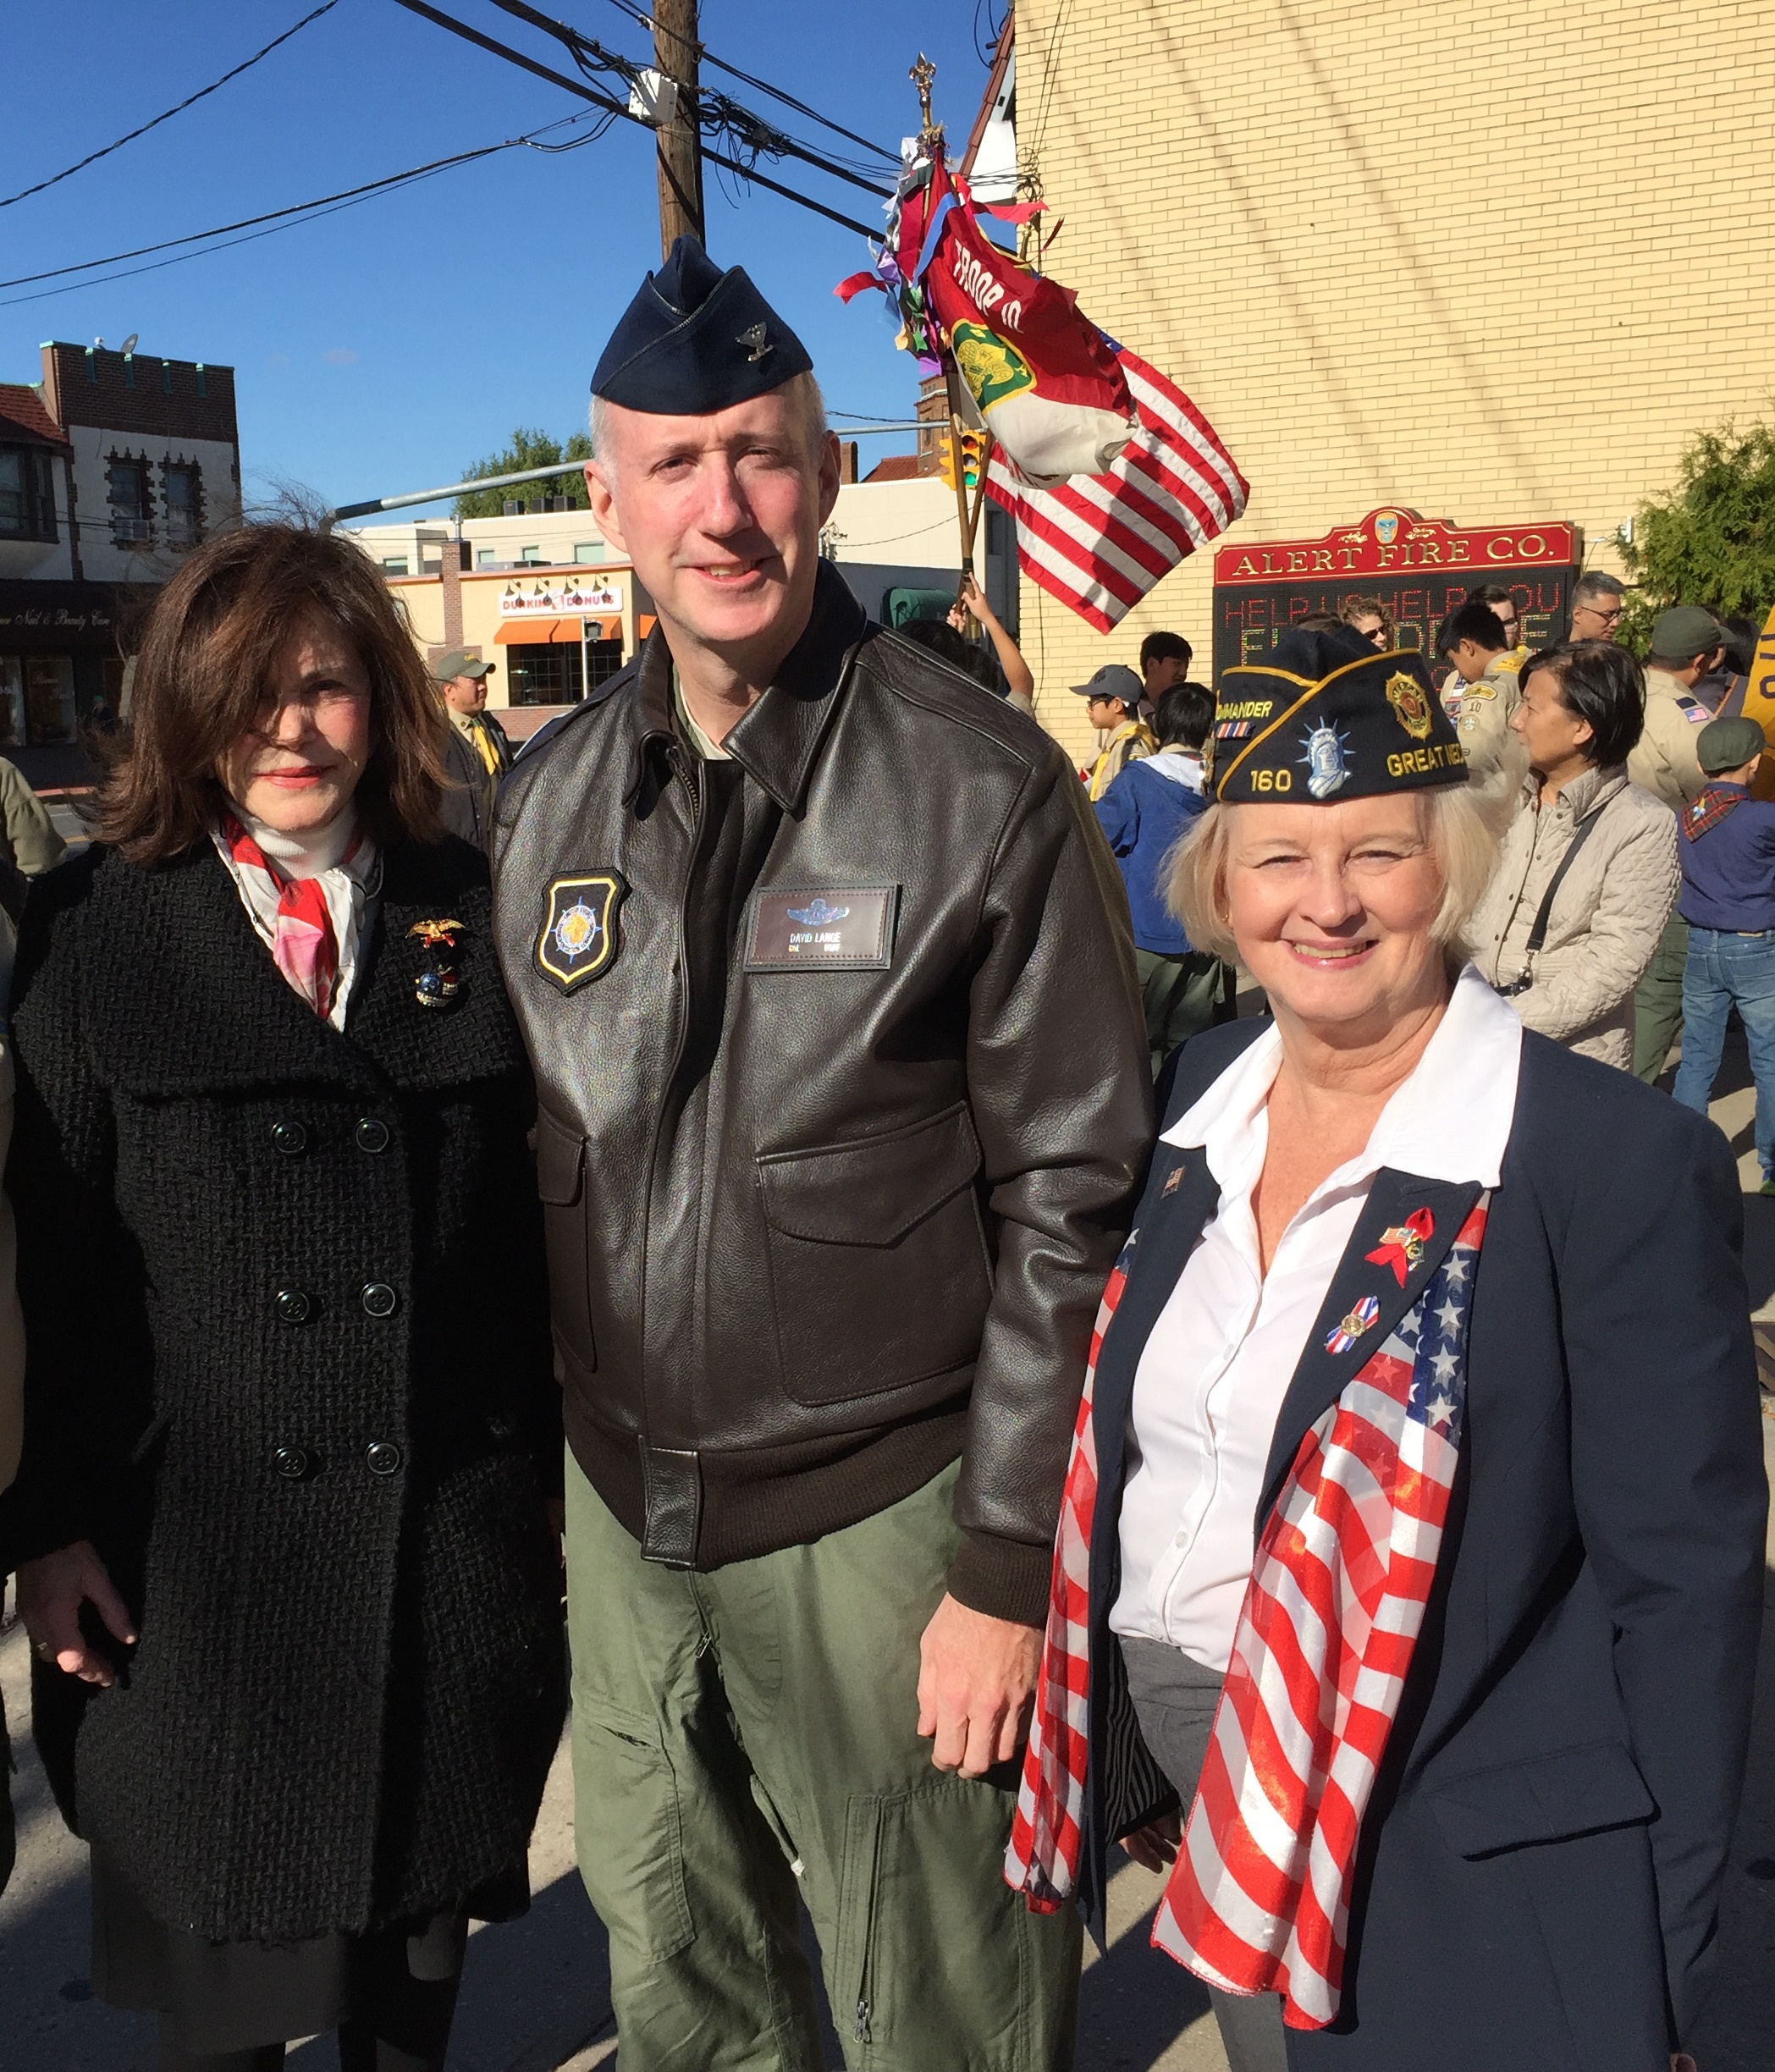 Councilwoman Lee Seeman, Grand Marshal Col. David M. Lange, and Great Neck Parade Committee Chair Louise McCann.